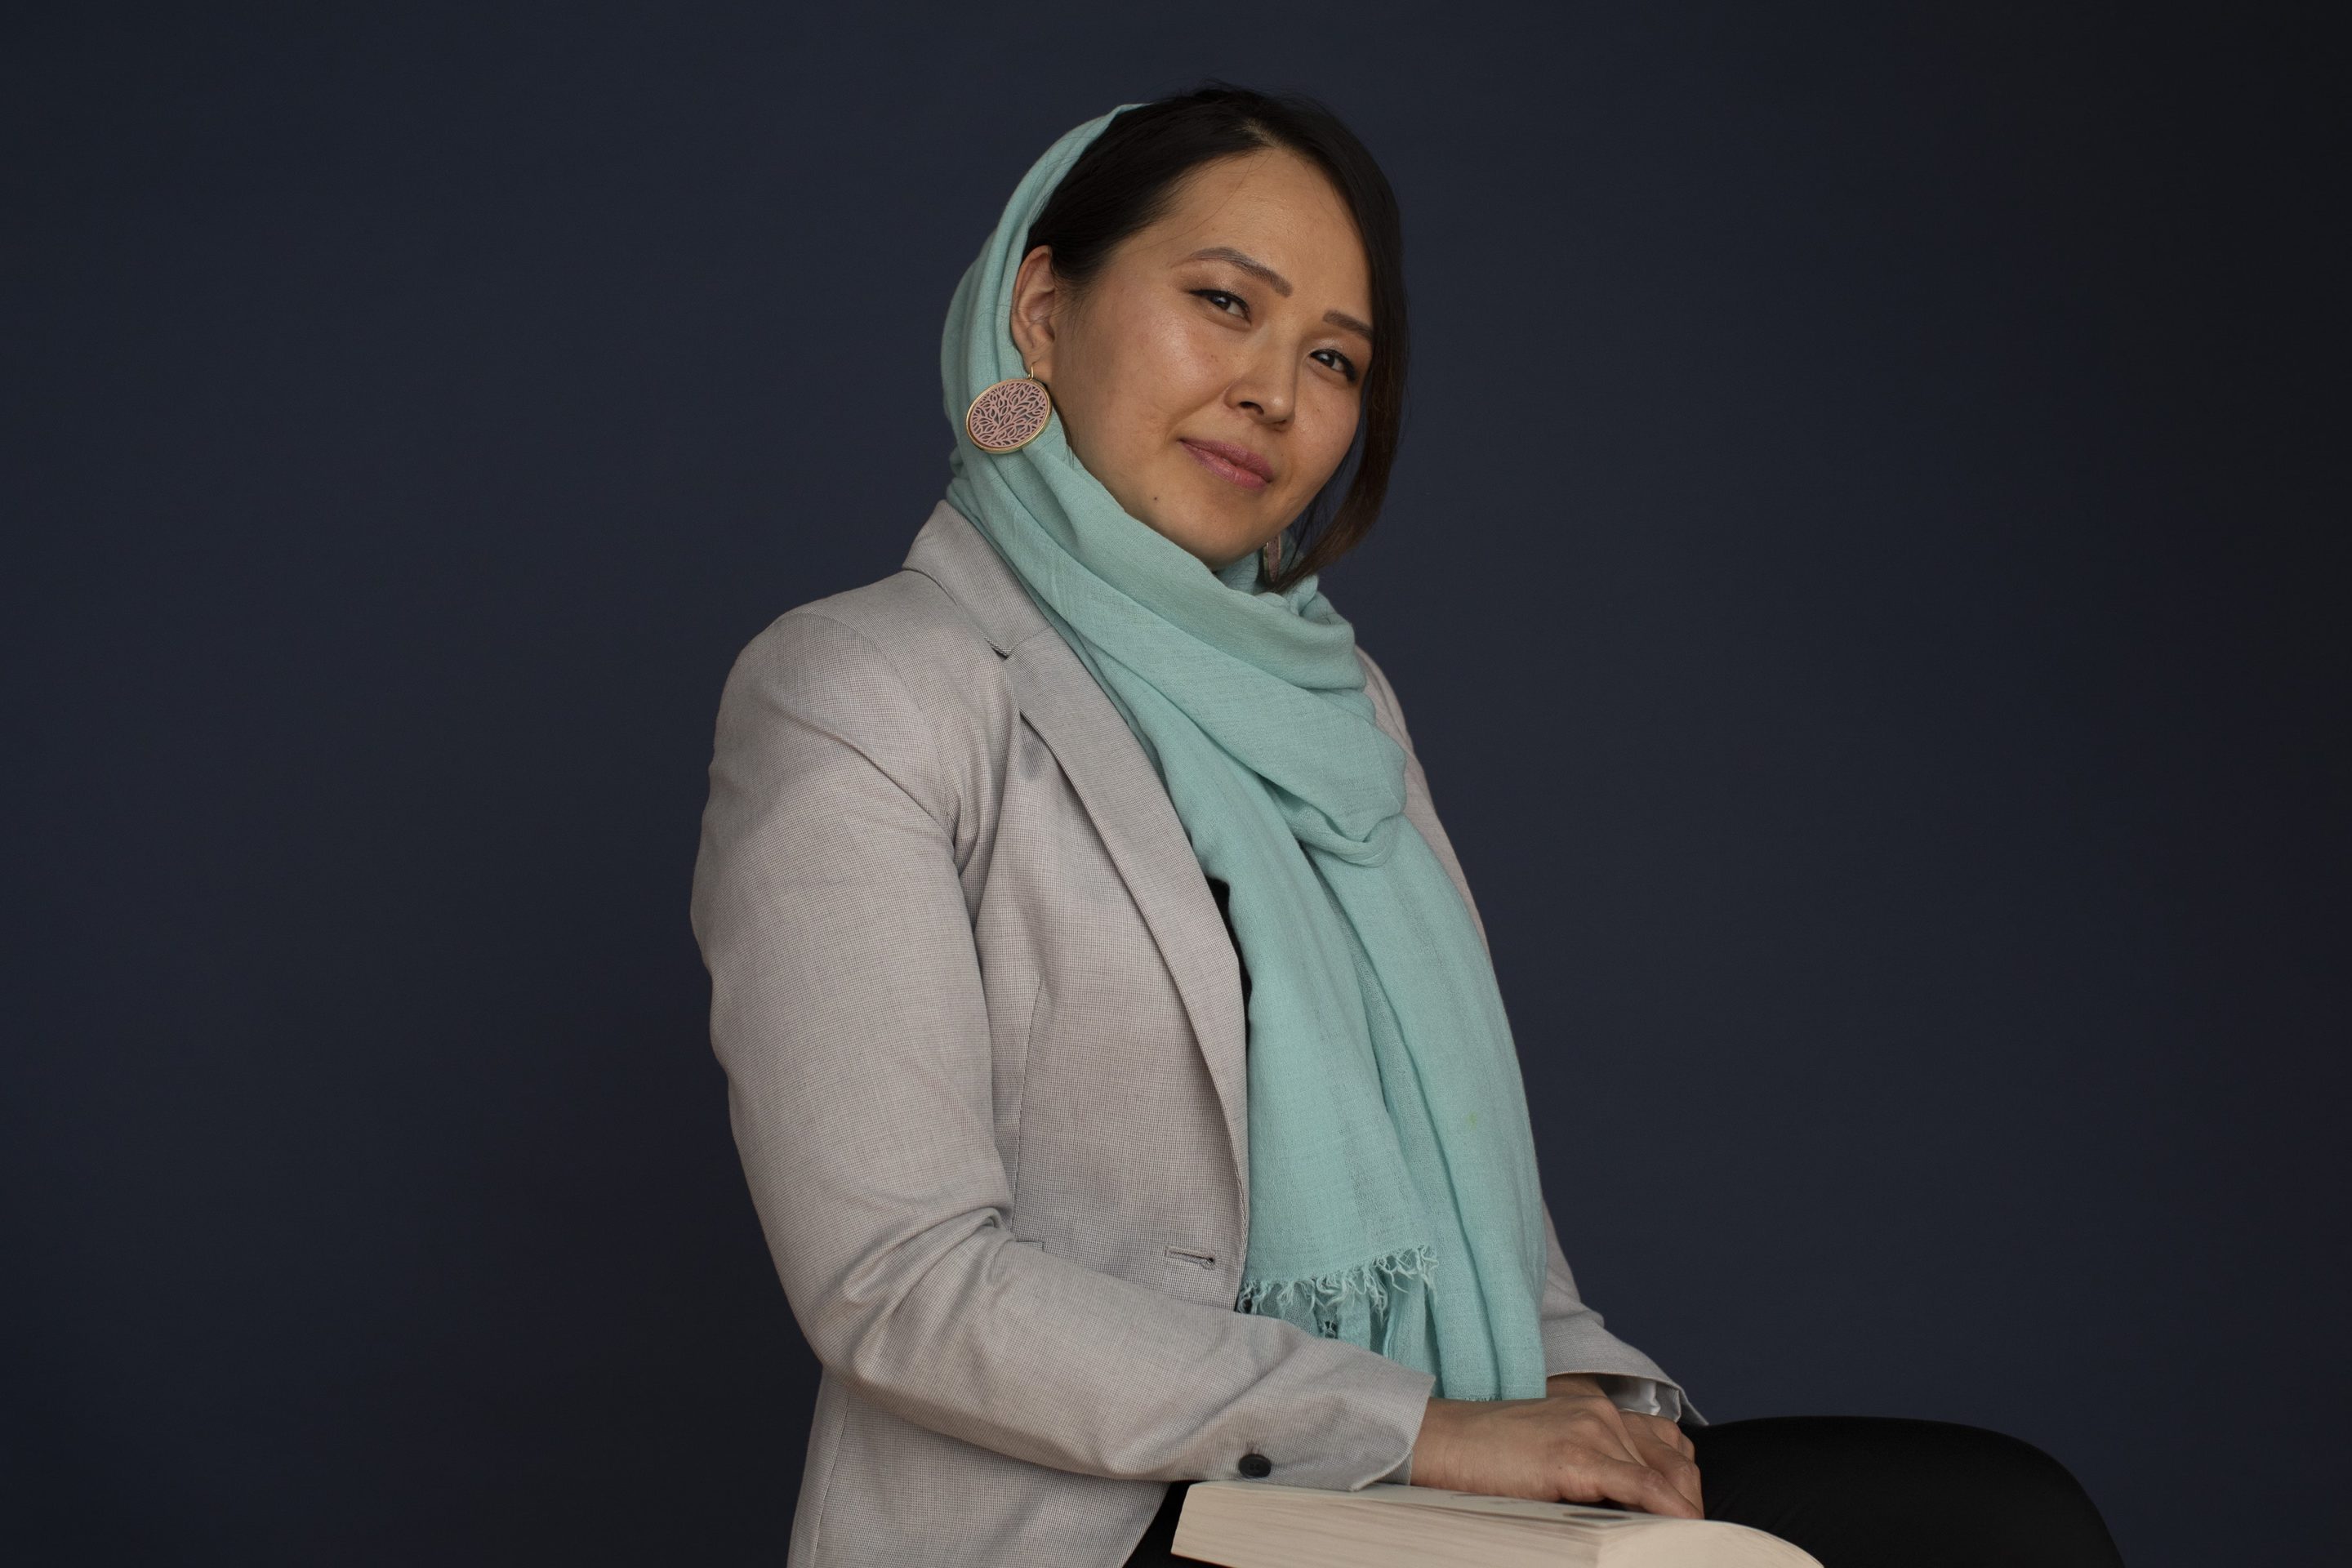 Nasrin Husseini, a member of the Hazara ethnic group from Afghanistan, now living in Canada, is photographed  in Toronto  on Saturday February 29, 2020.